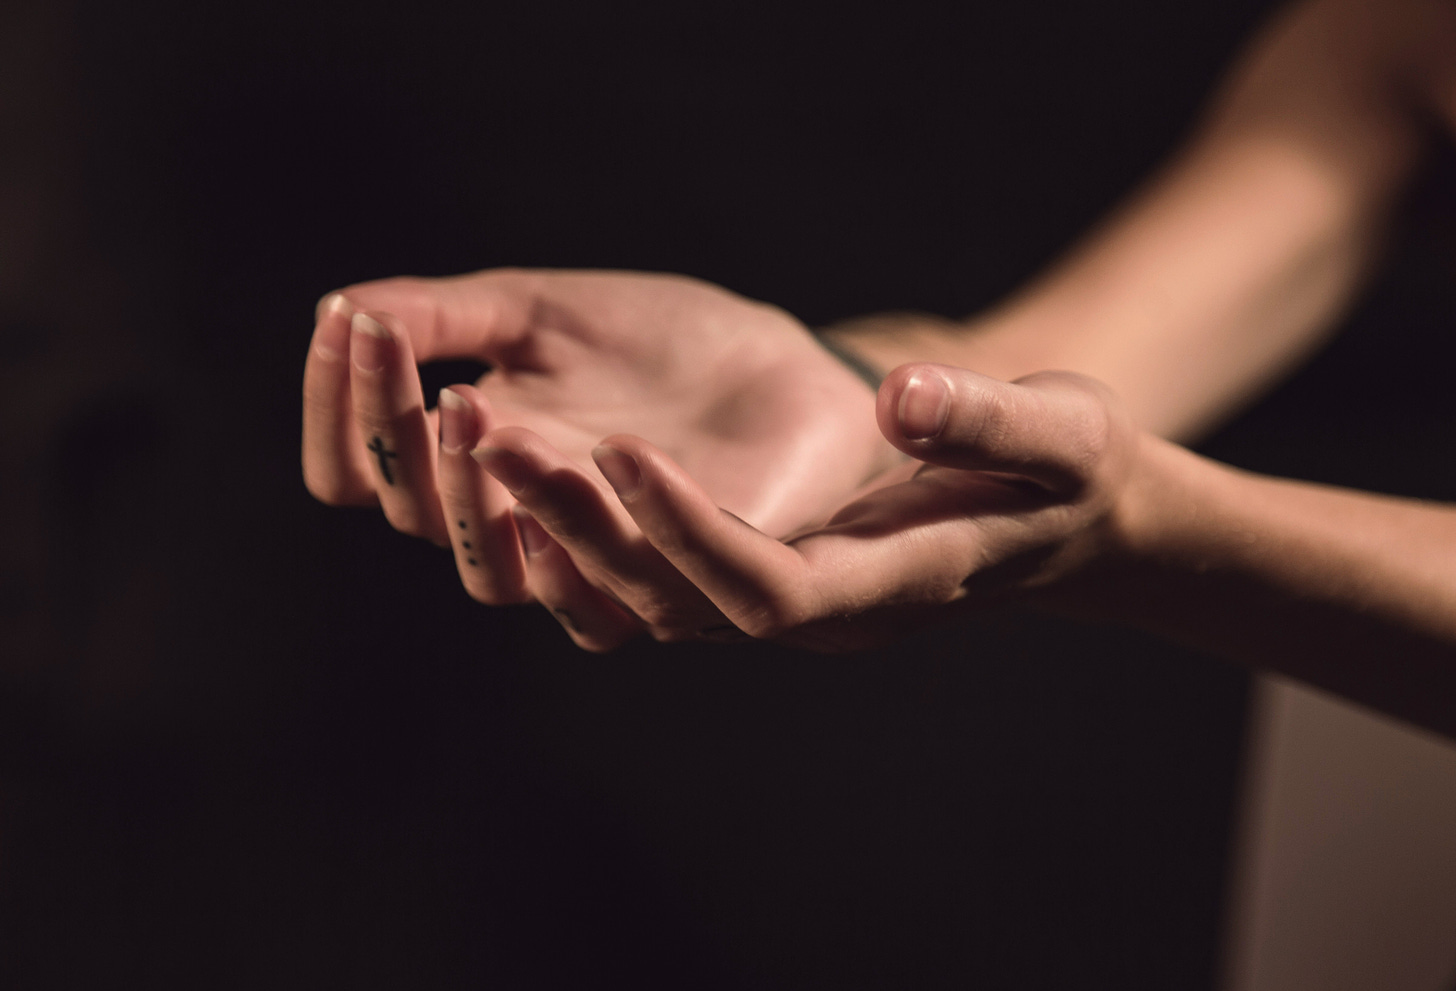 Opening yourself up, accepting. Hands are palm up in offering. [Credit: Milada Vigerova on Unsplash].